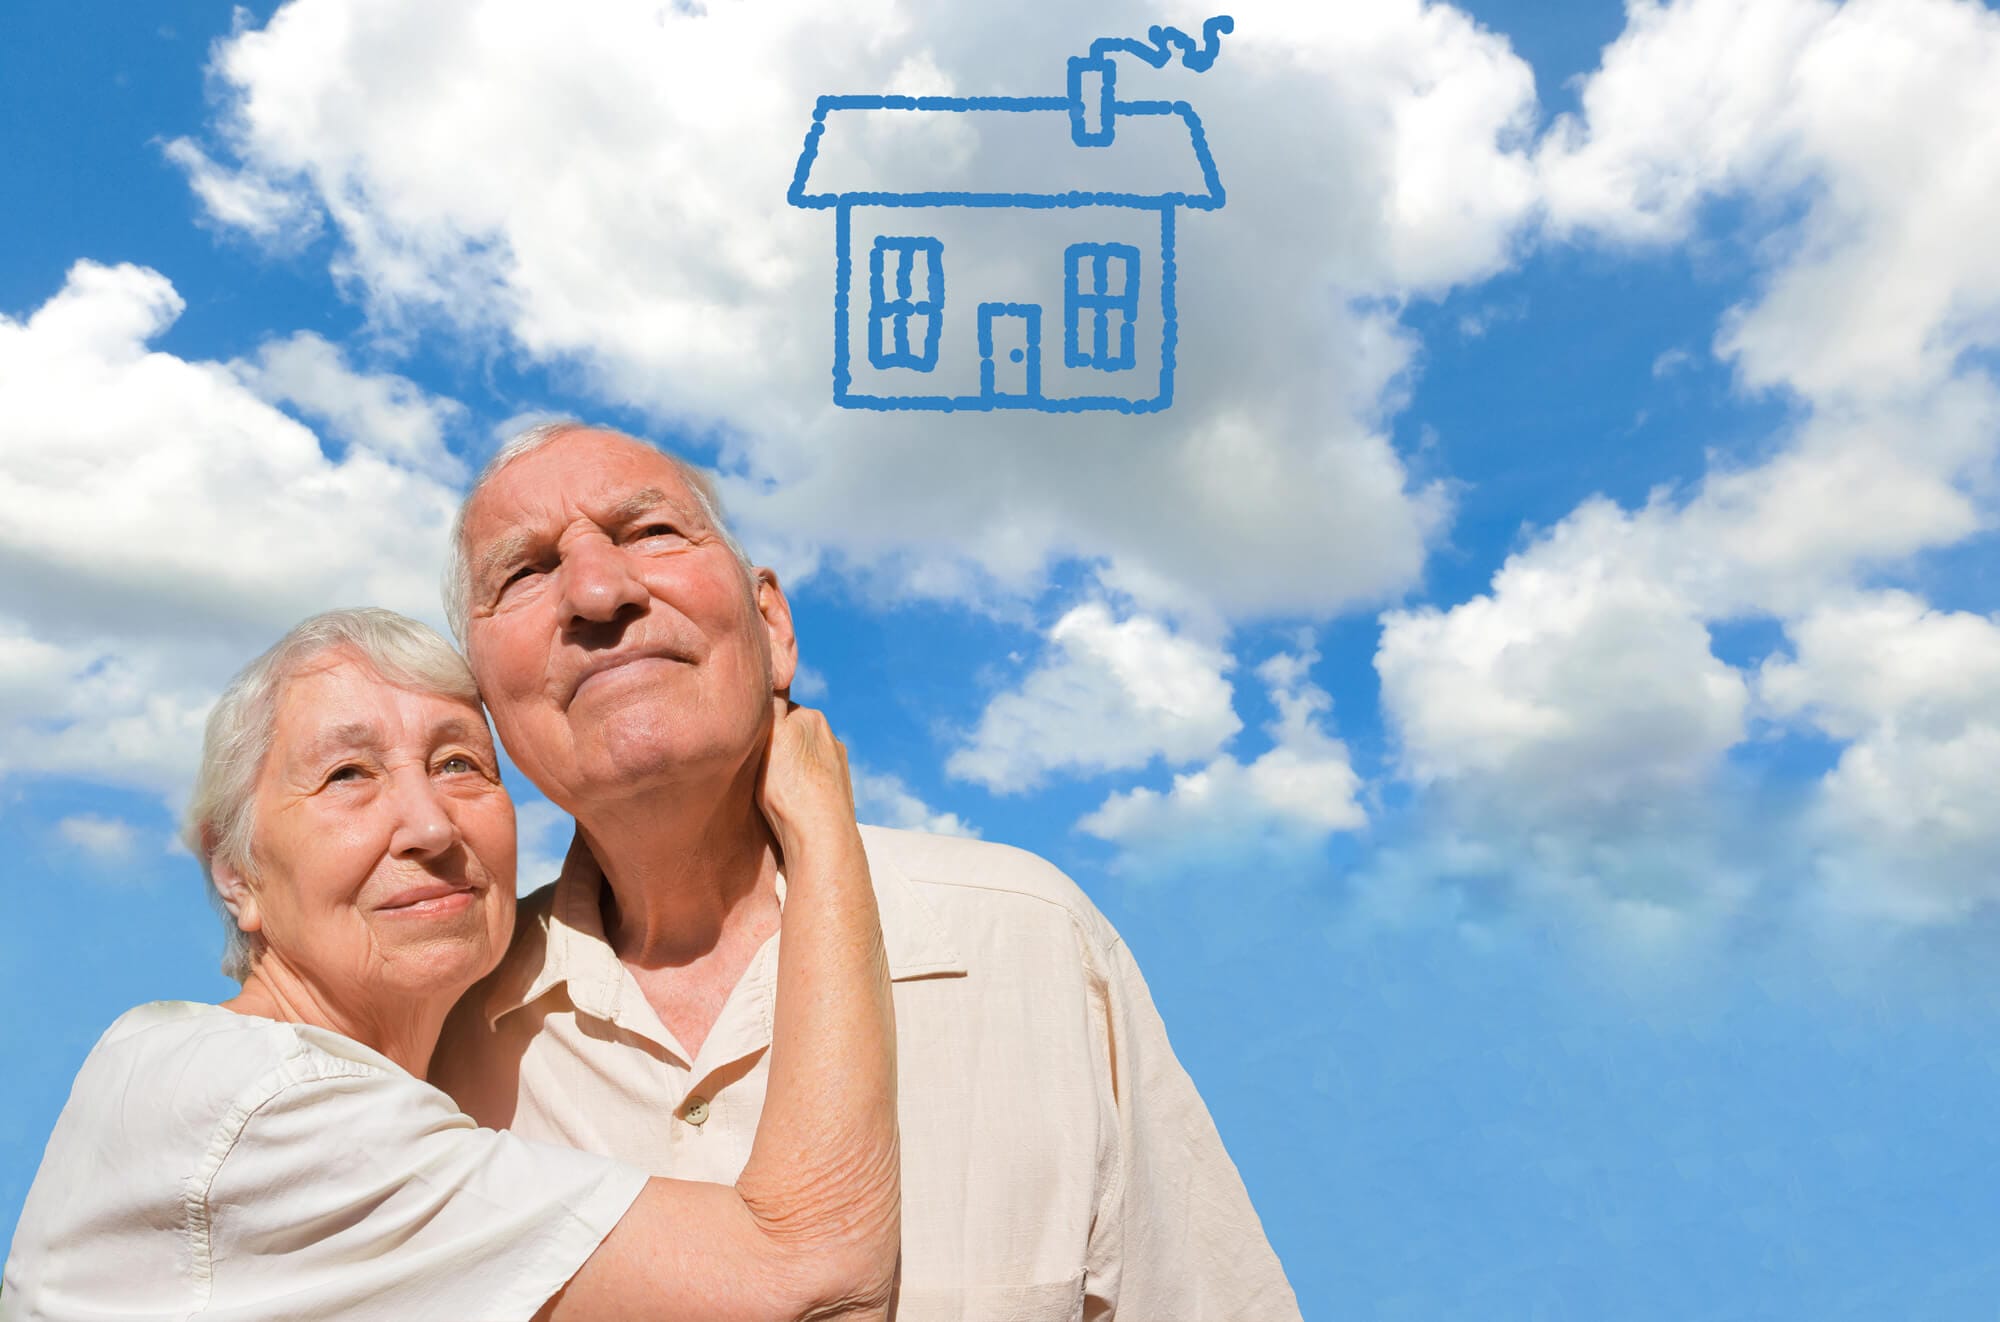 couple imagining their ideal dream home for retirement